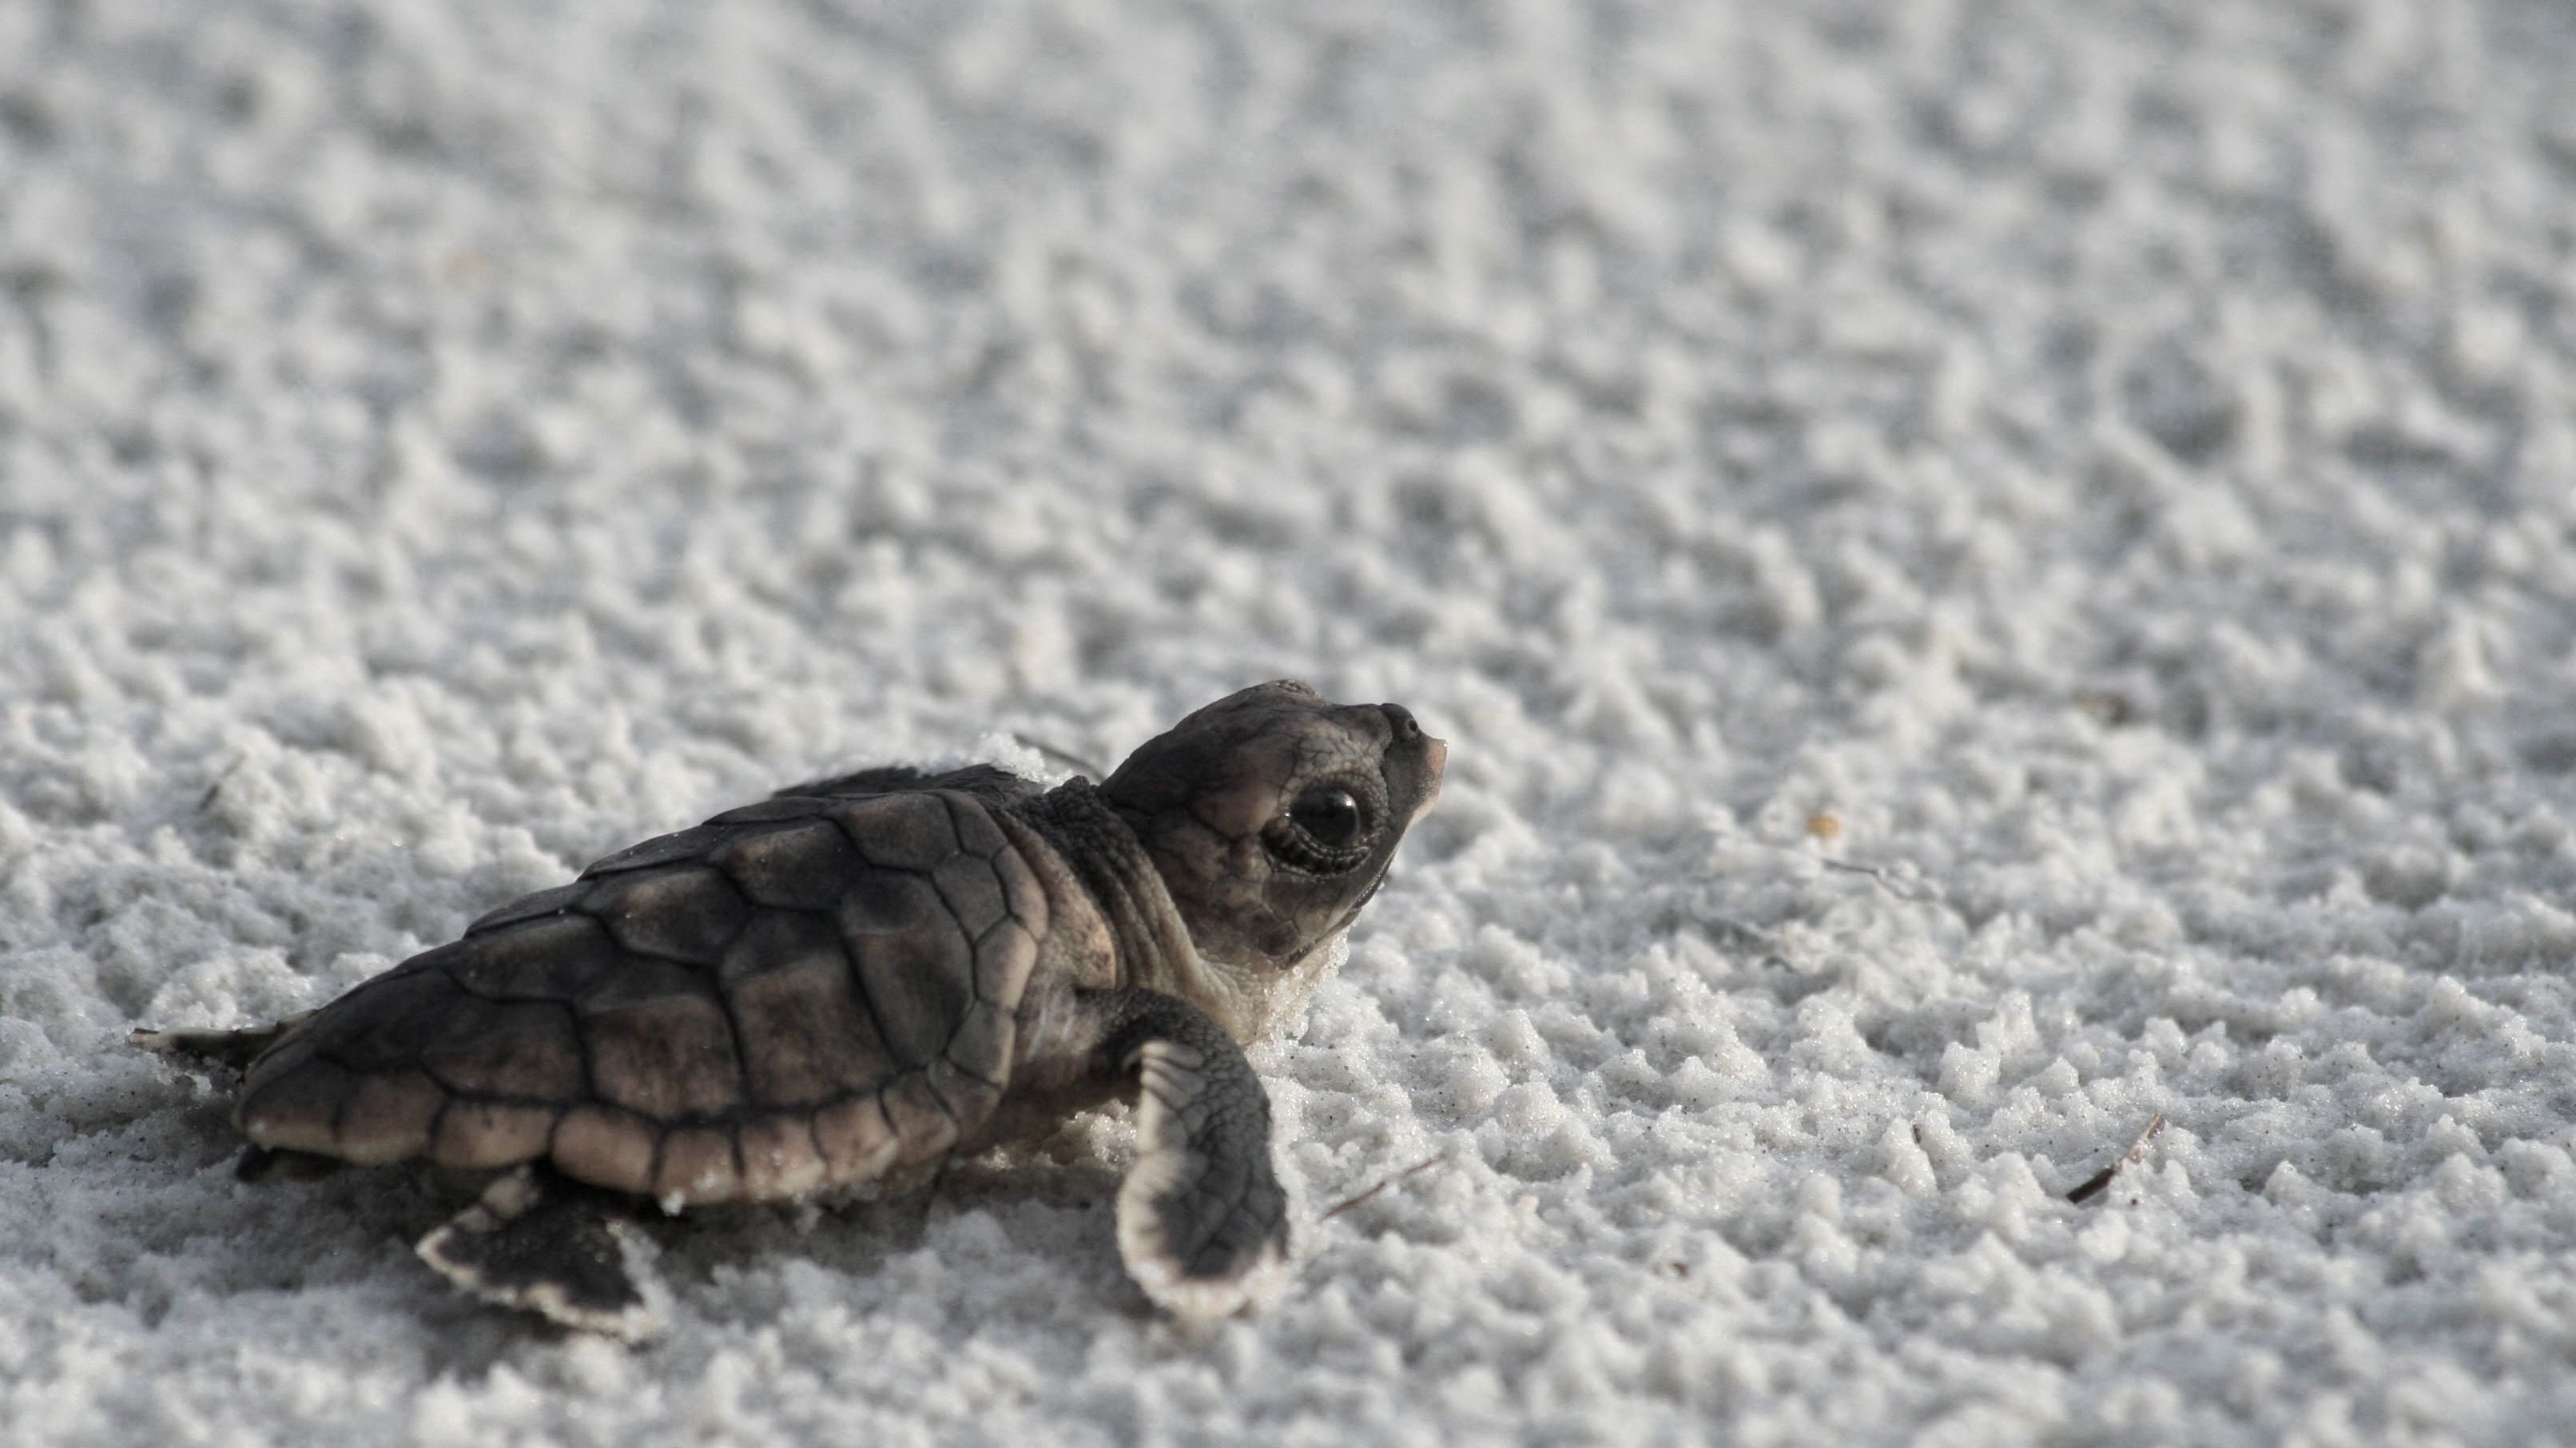 Awesome Cute Sea Turtle HD Wallpaper Free Download